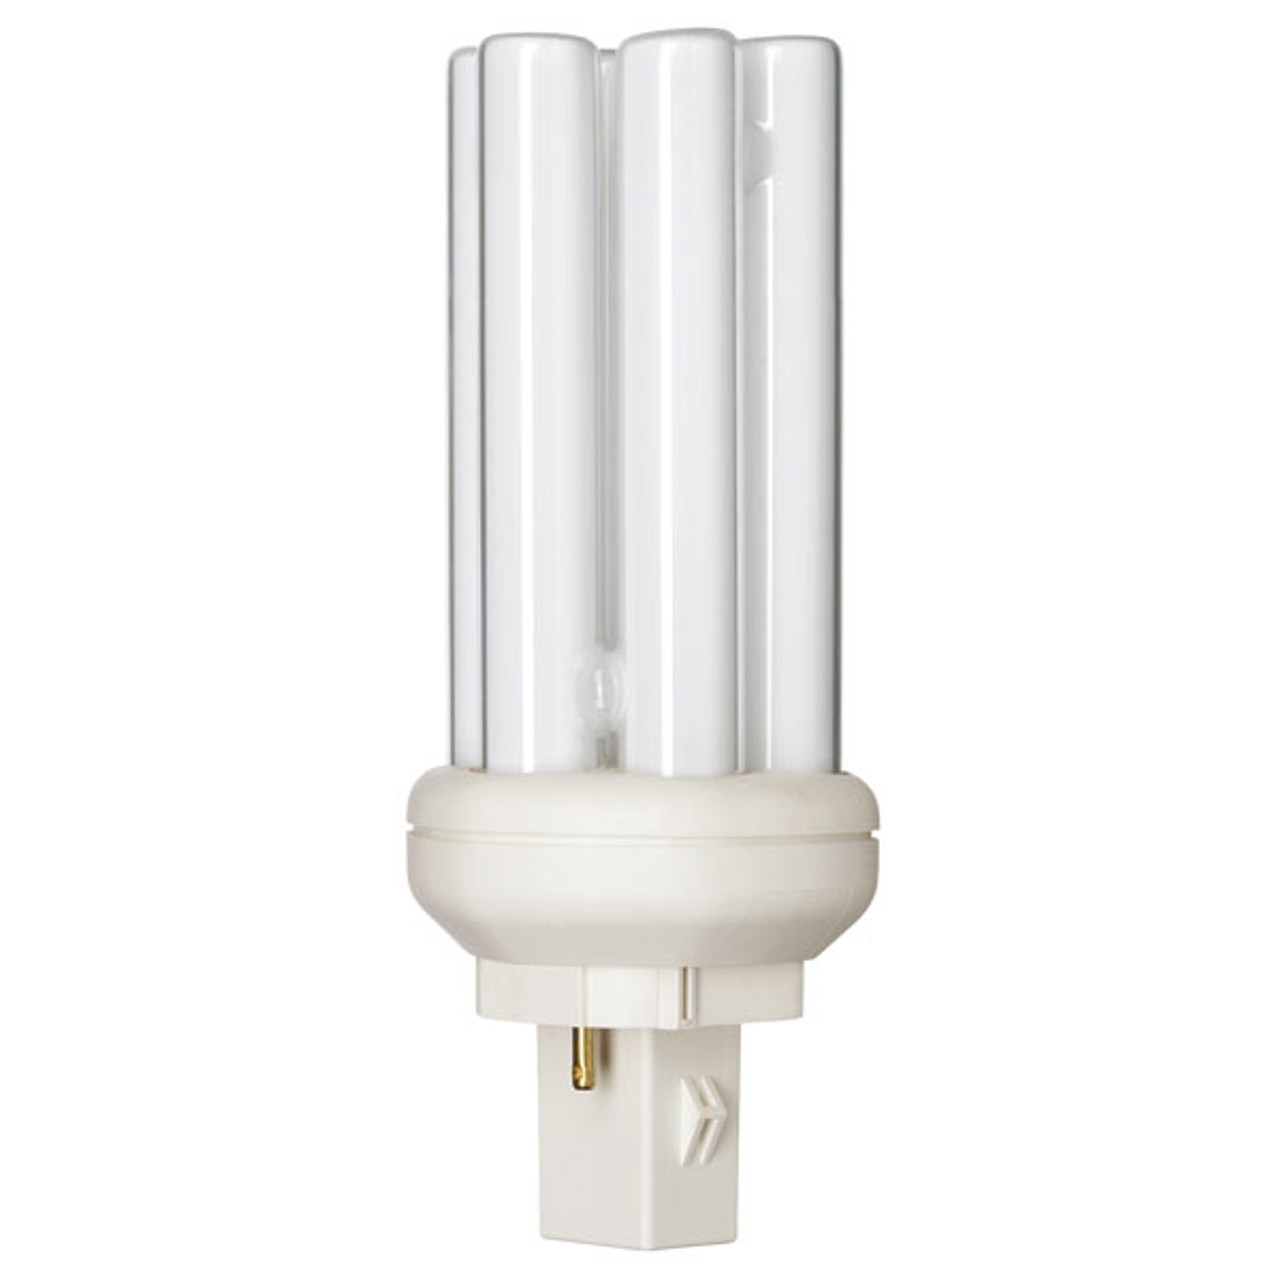 Philips PL-T 18W 2-Pin 840 Cool White